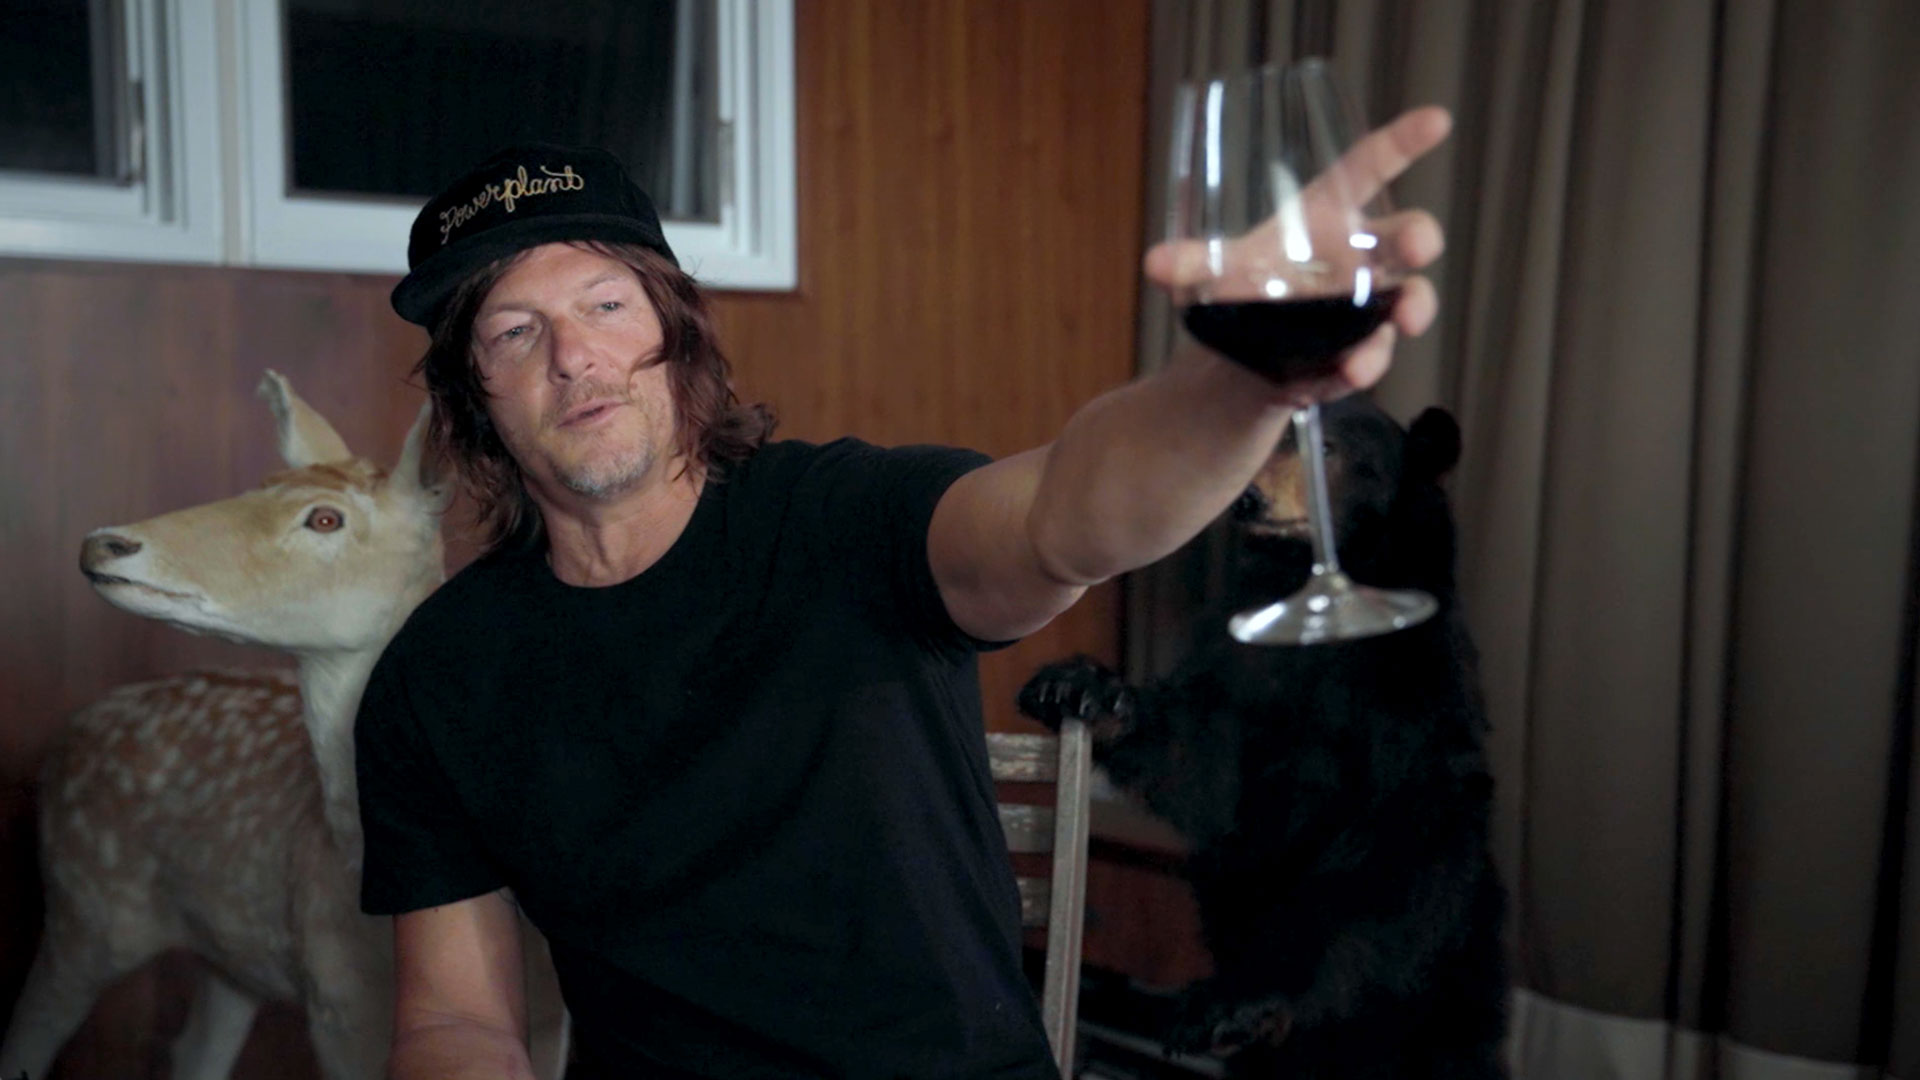 Watch Ride With Norman Reedus Talked About Scene: Season 5, Episode 6 | Ride with Norman Reedus Video Extras